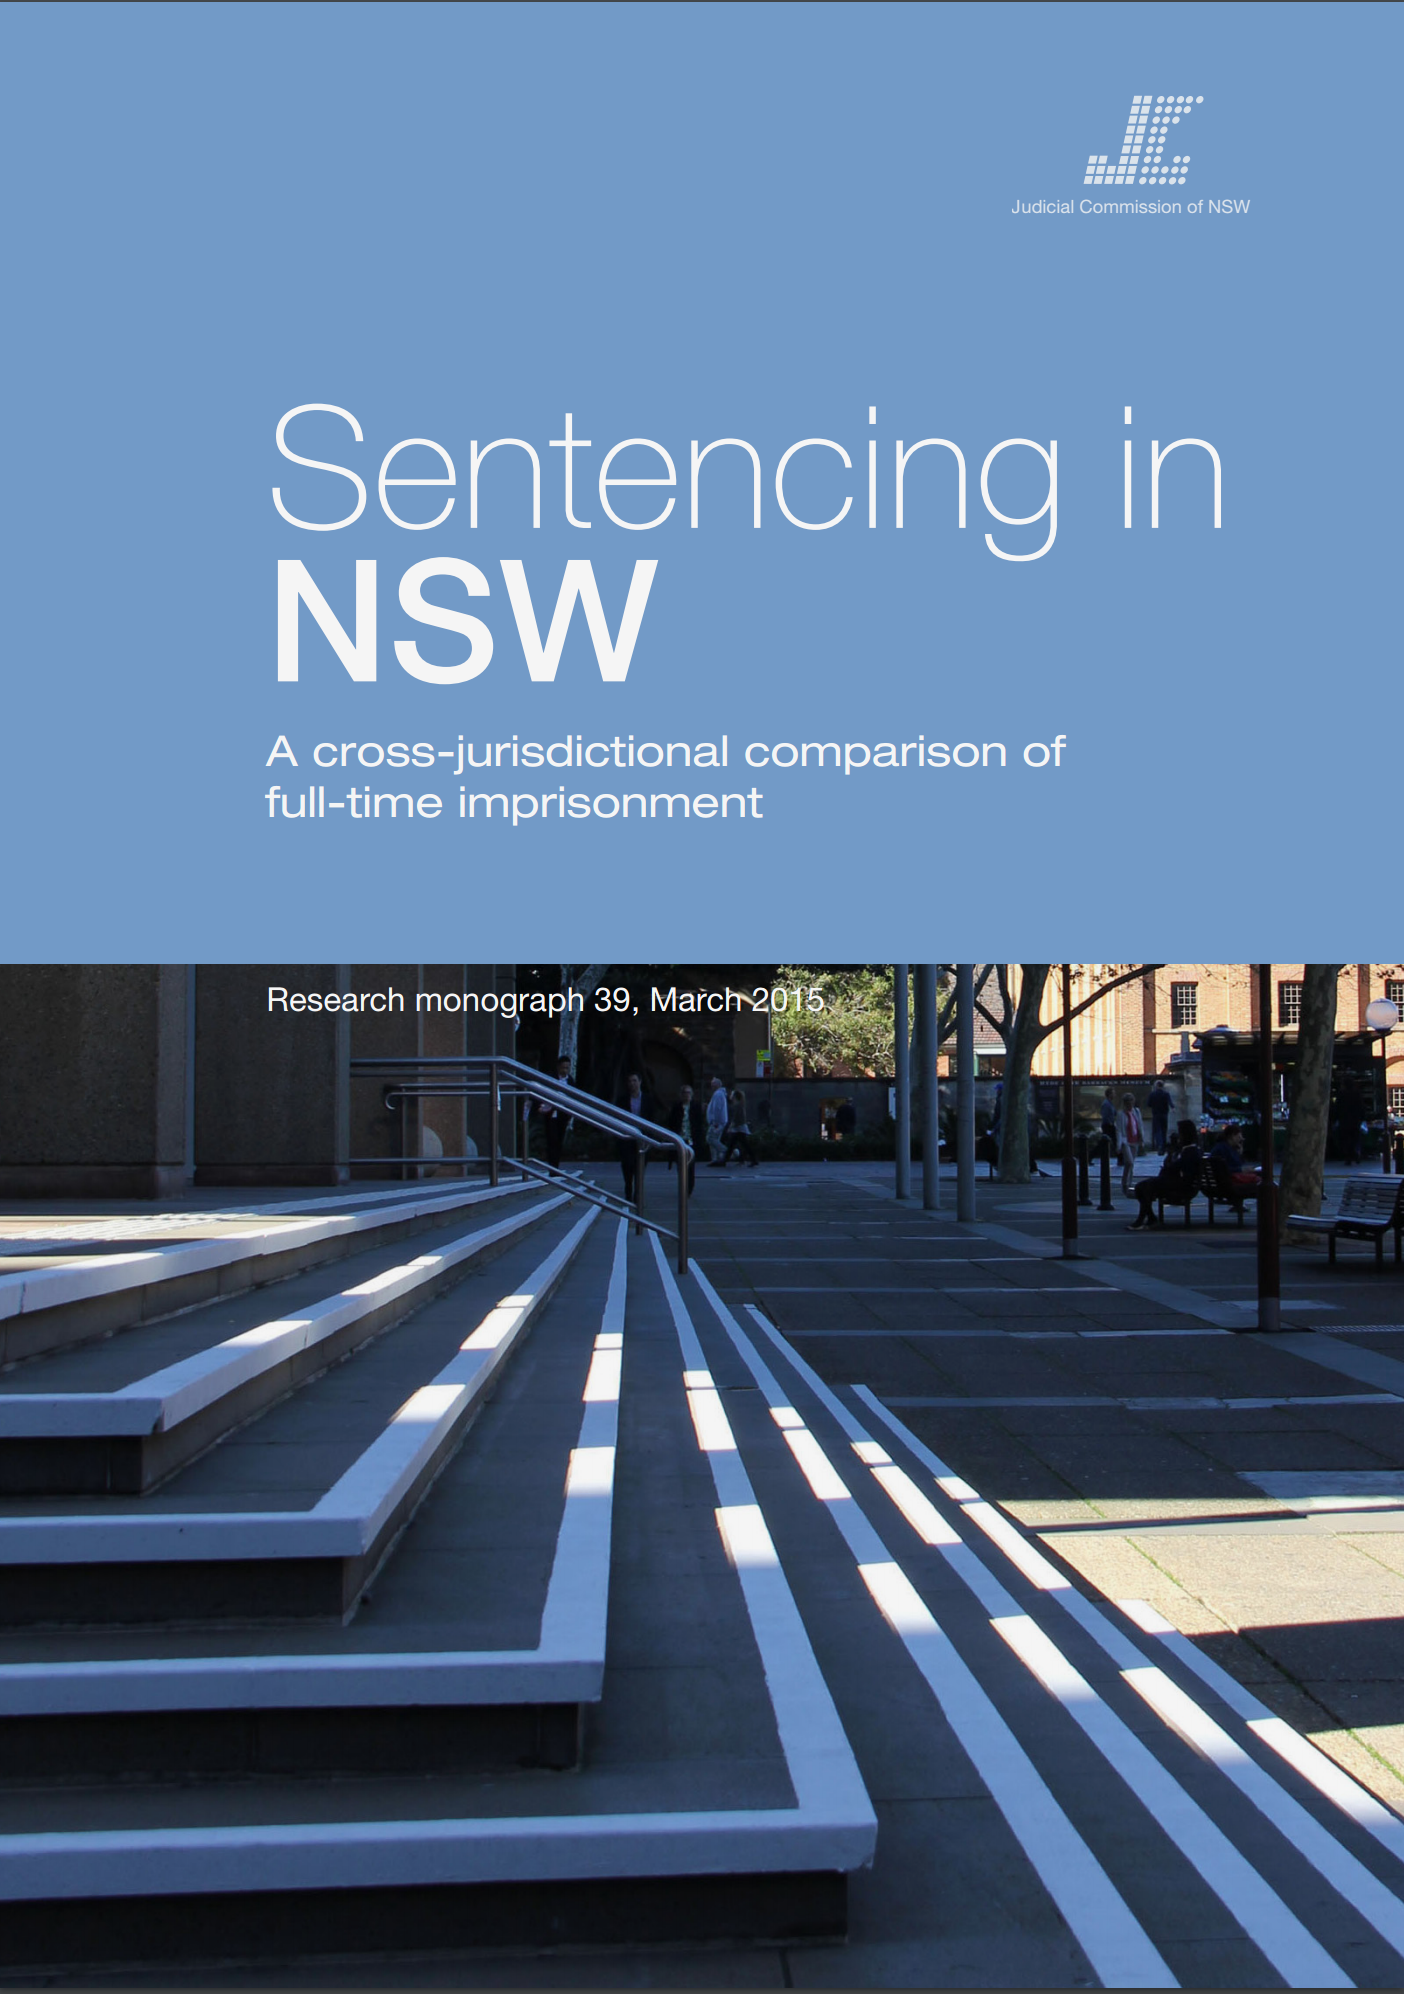 Sentencing in NSW - A cross-jurisdictional comparison of full-time imprisonment